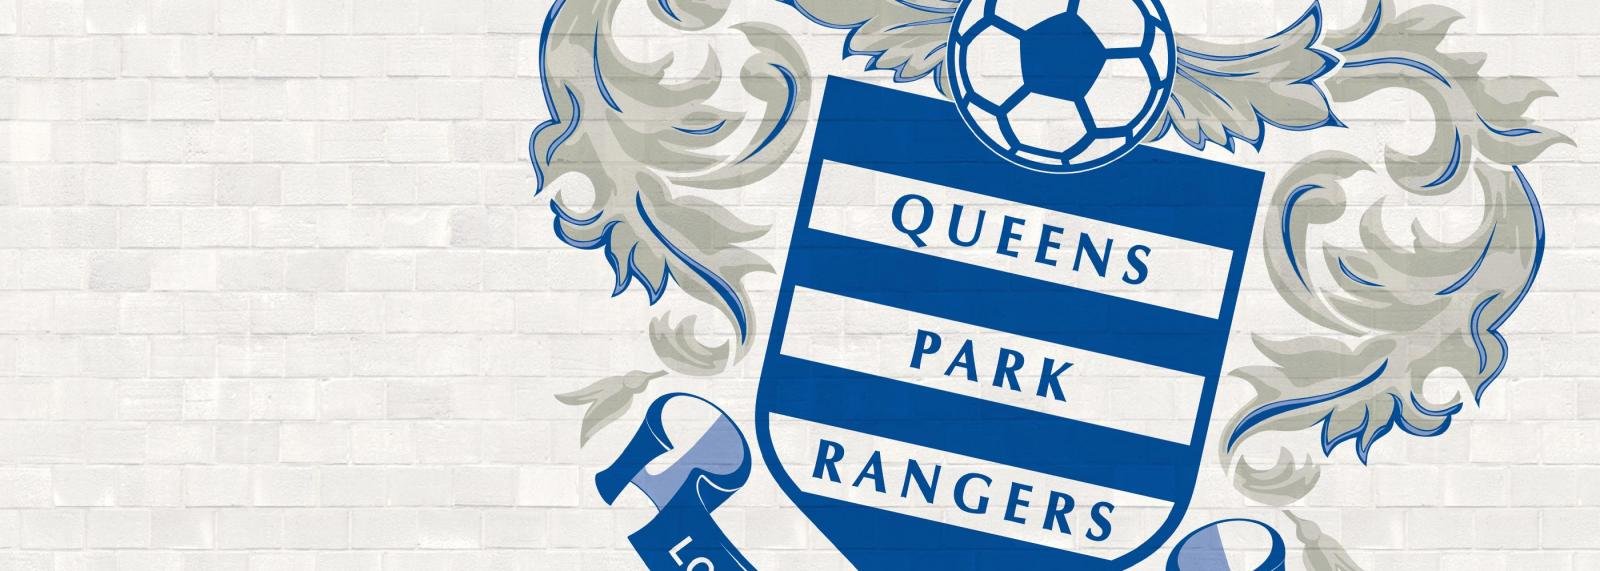 5 issues QPR and Jimmy need to address